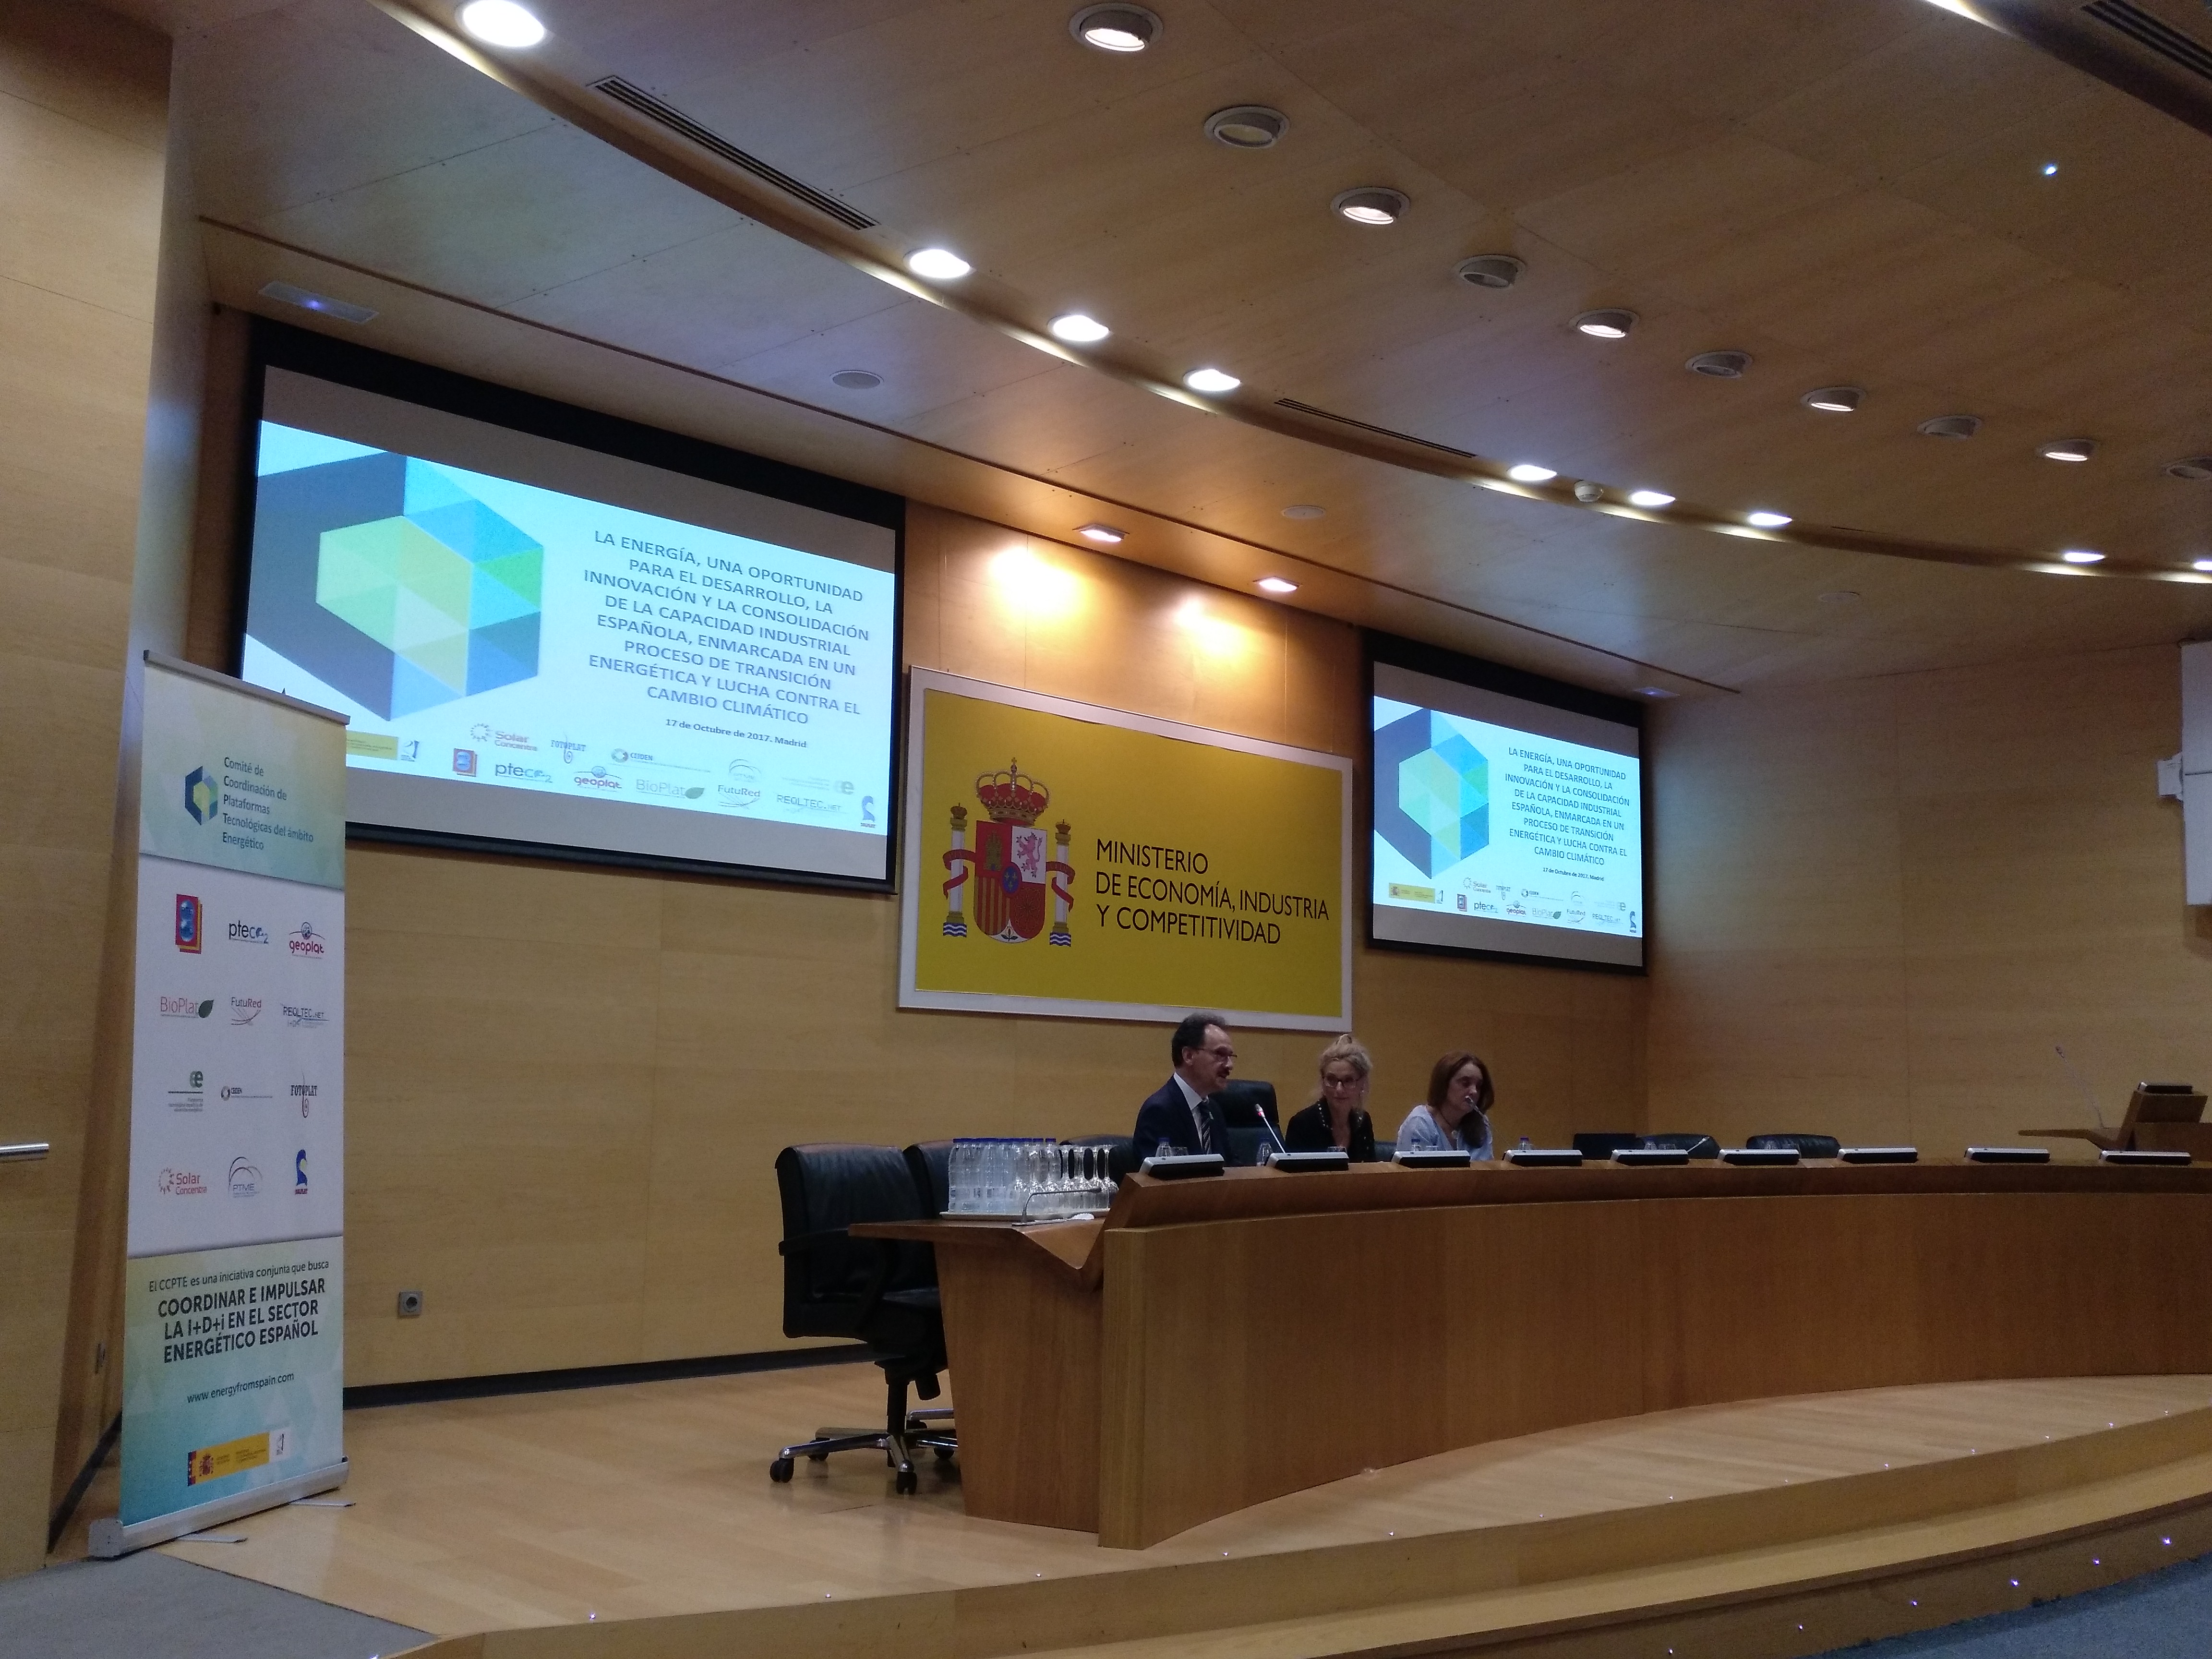 Main conclusions of the Energy Platforms Workshop: Energy as an opportunity for the development and reinforcement of the Spanish industrial capability in a context of energy transition and mitigation of climate change